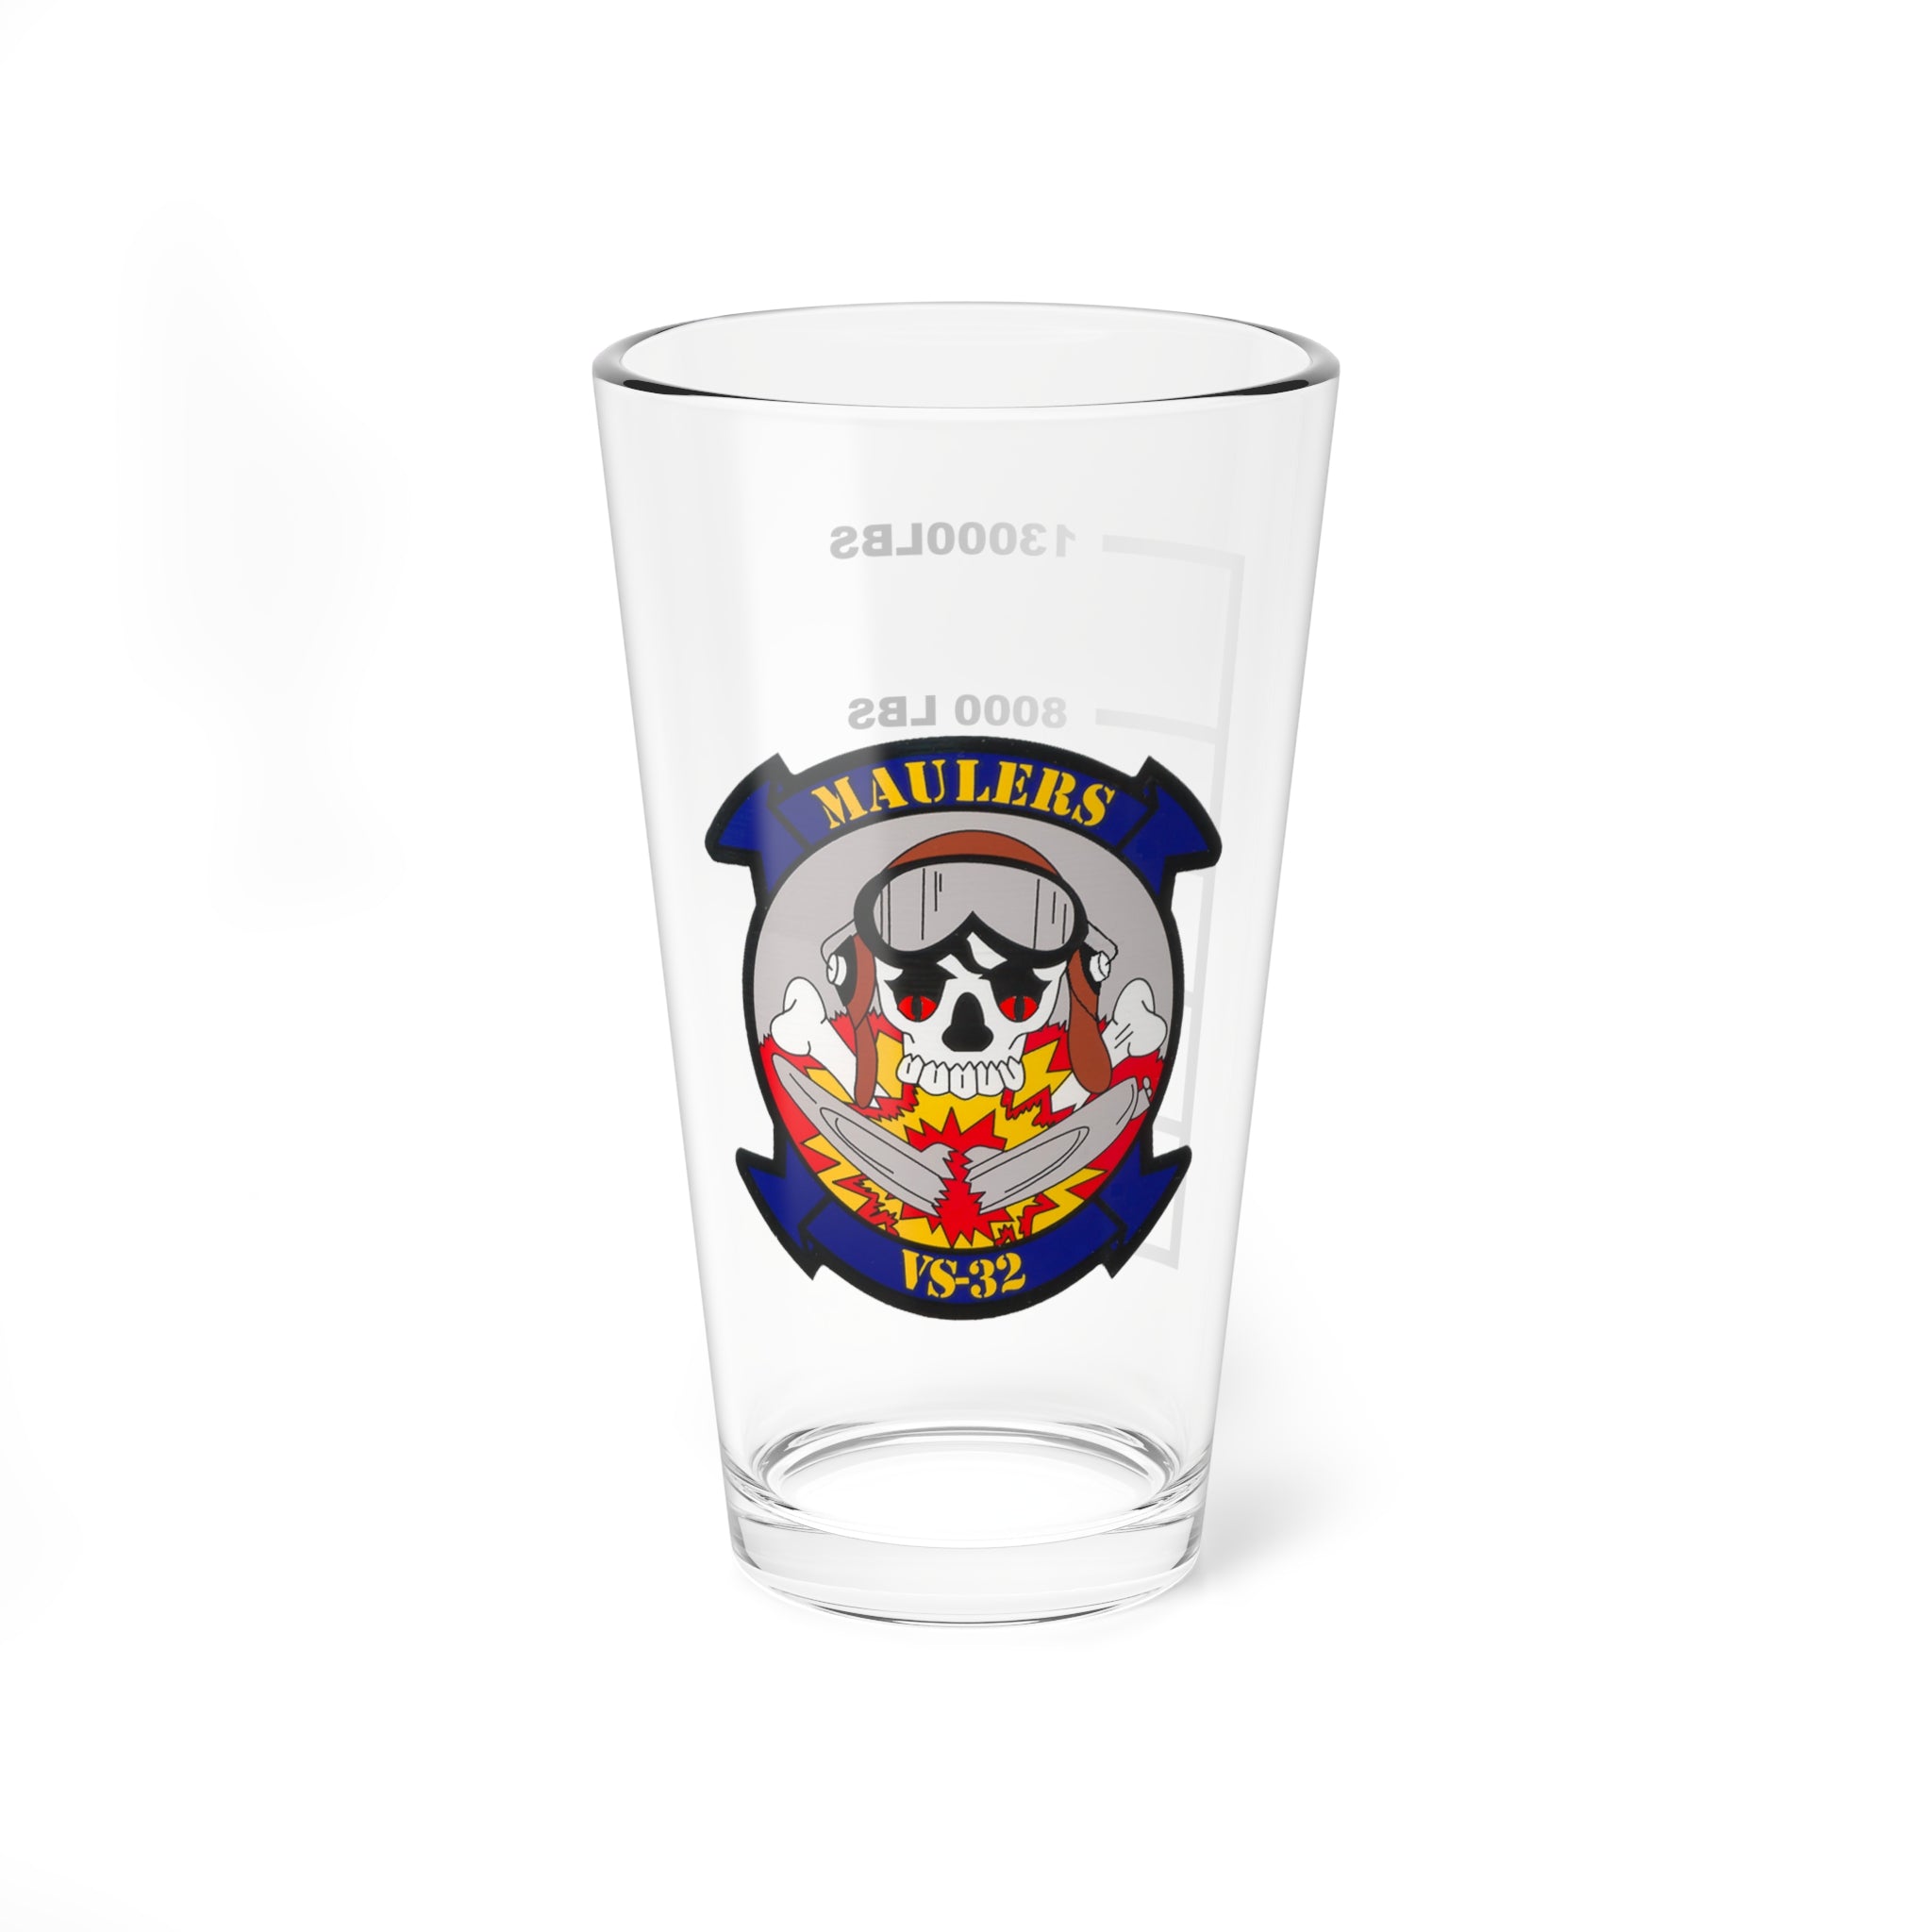 VS-32 "Maulers" Skull Patch Pint Glass US Navy Sea Control Squadron flying the S-3 Viking